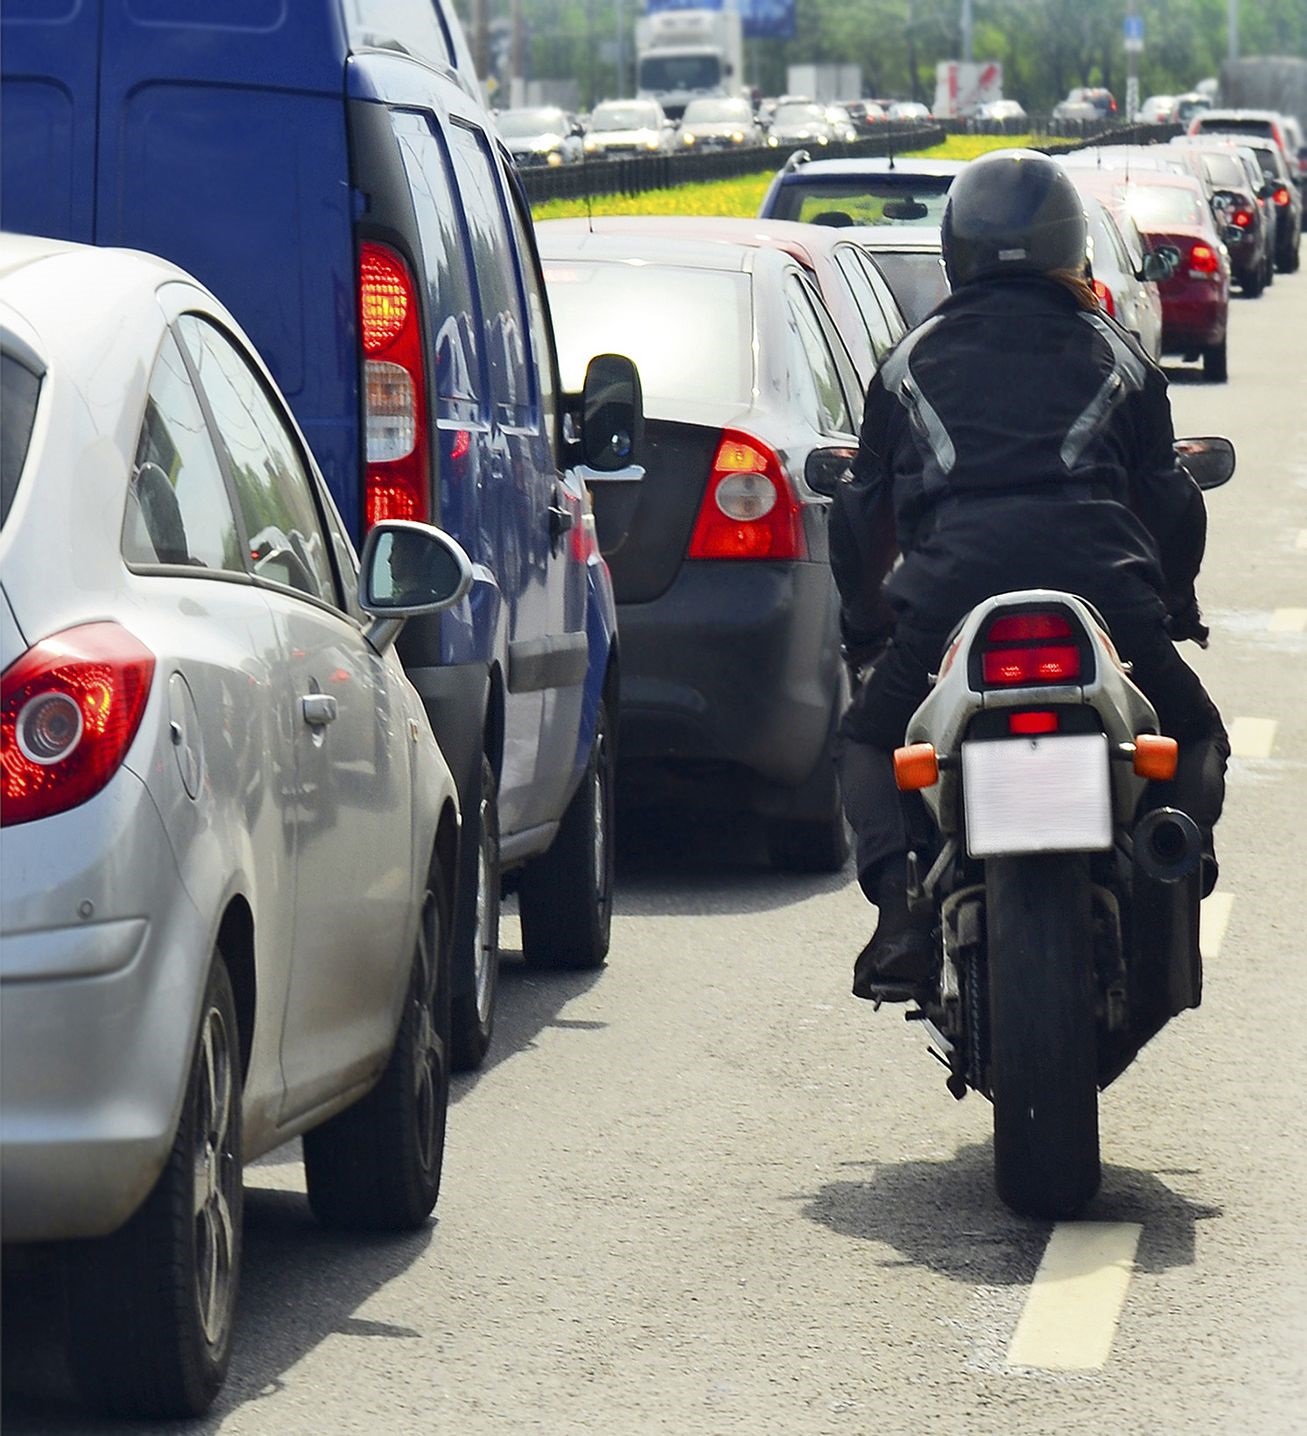 7 Safety Tips for Motorcycle Riders